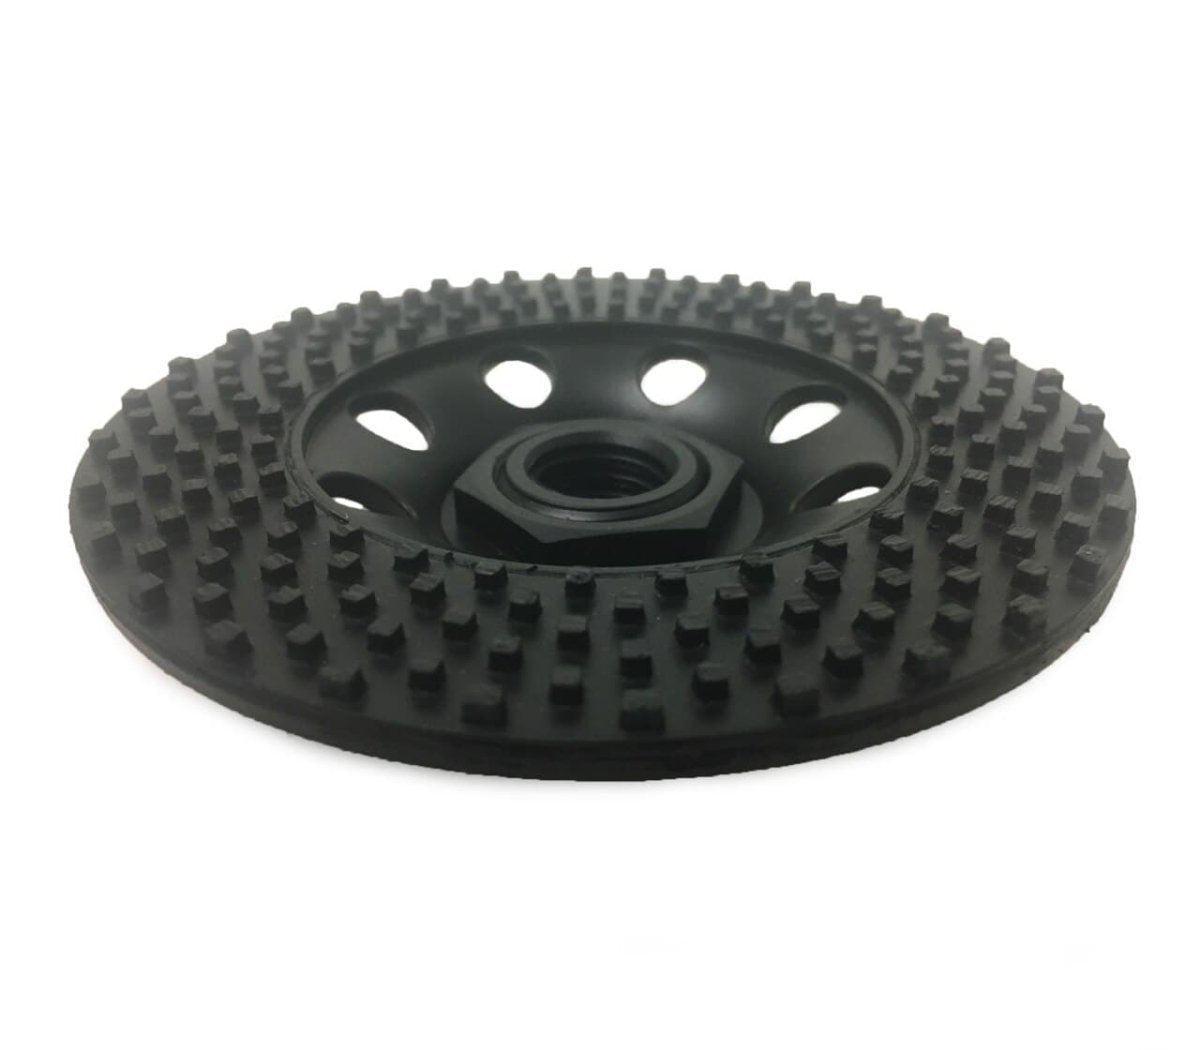 Dia Plus Light Weight Cup Wheel for Grinding Stone and Granite - Sale - Dia Plus